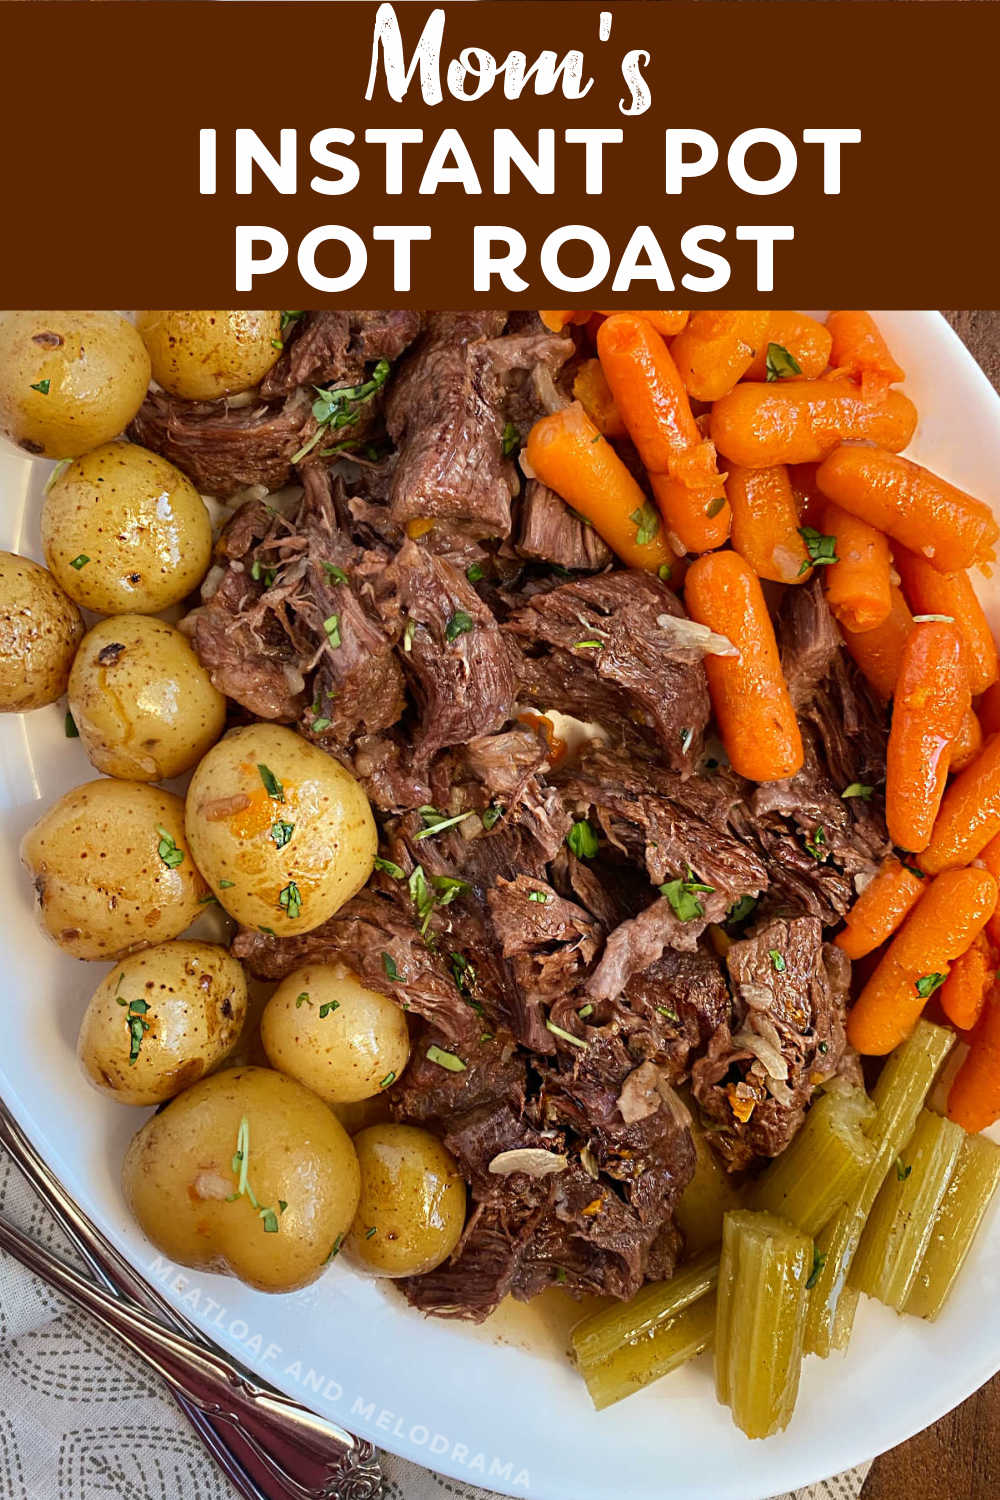 Mom's Instant Pot Pot Roast with onion soup mix, potatoes and carrots is an easy recipe for beef chuck roast in the electric pressure cooker. This delicious beef roast is a family favorite and tasted just like Mom used to make! via @meamel